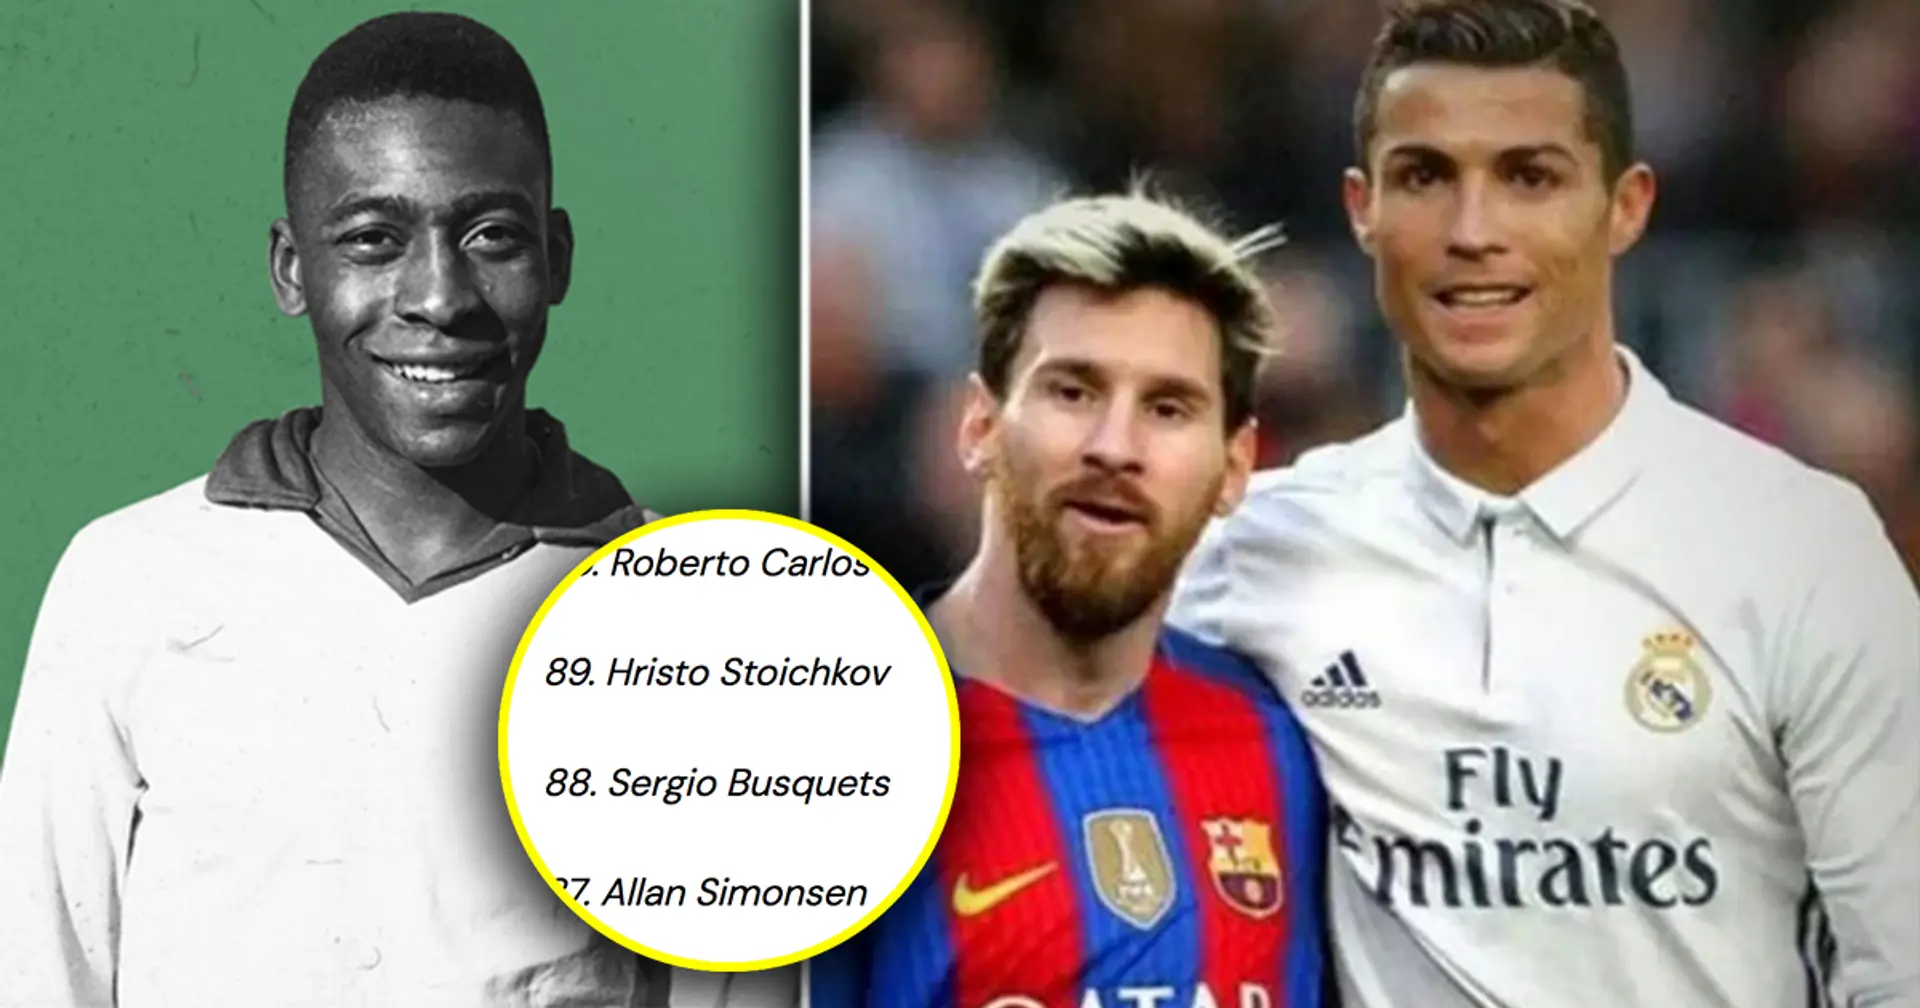 Messi ahead of Ronaldo, Pele outside top 3: all-time best players ranked